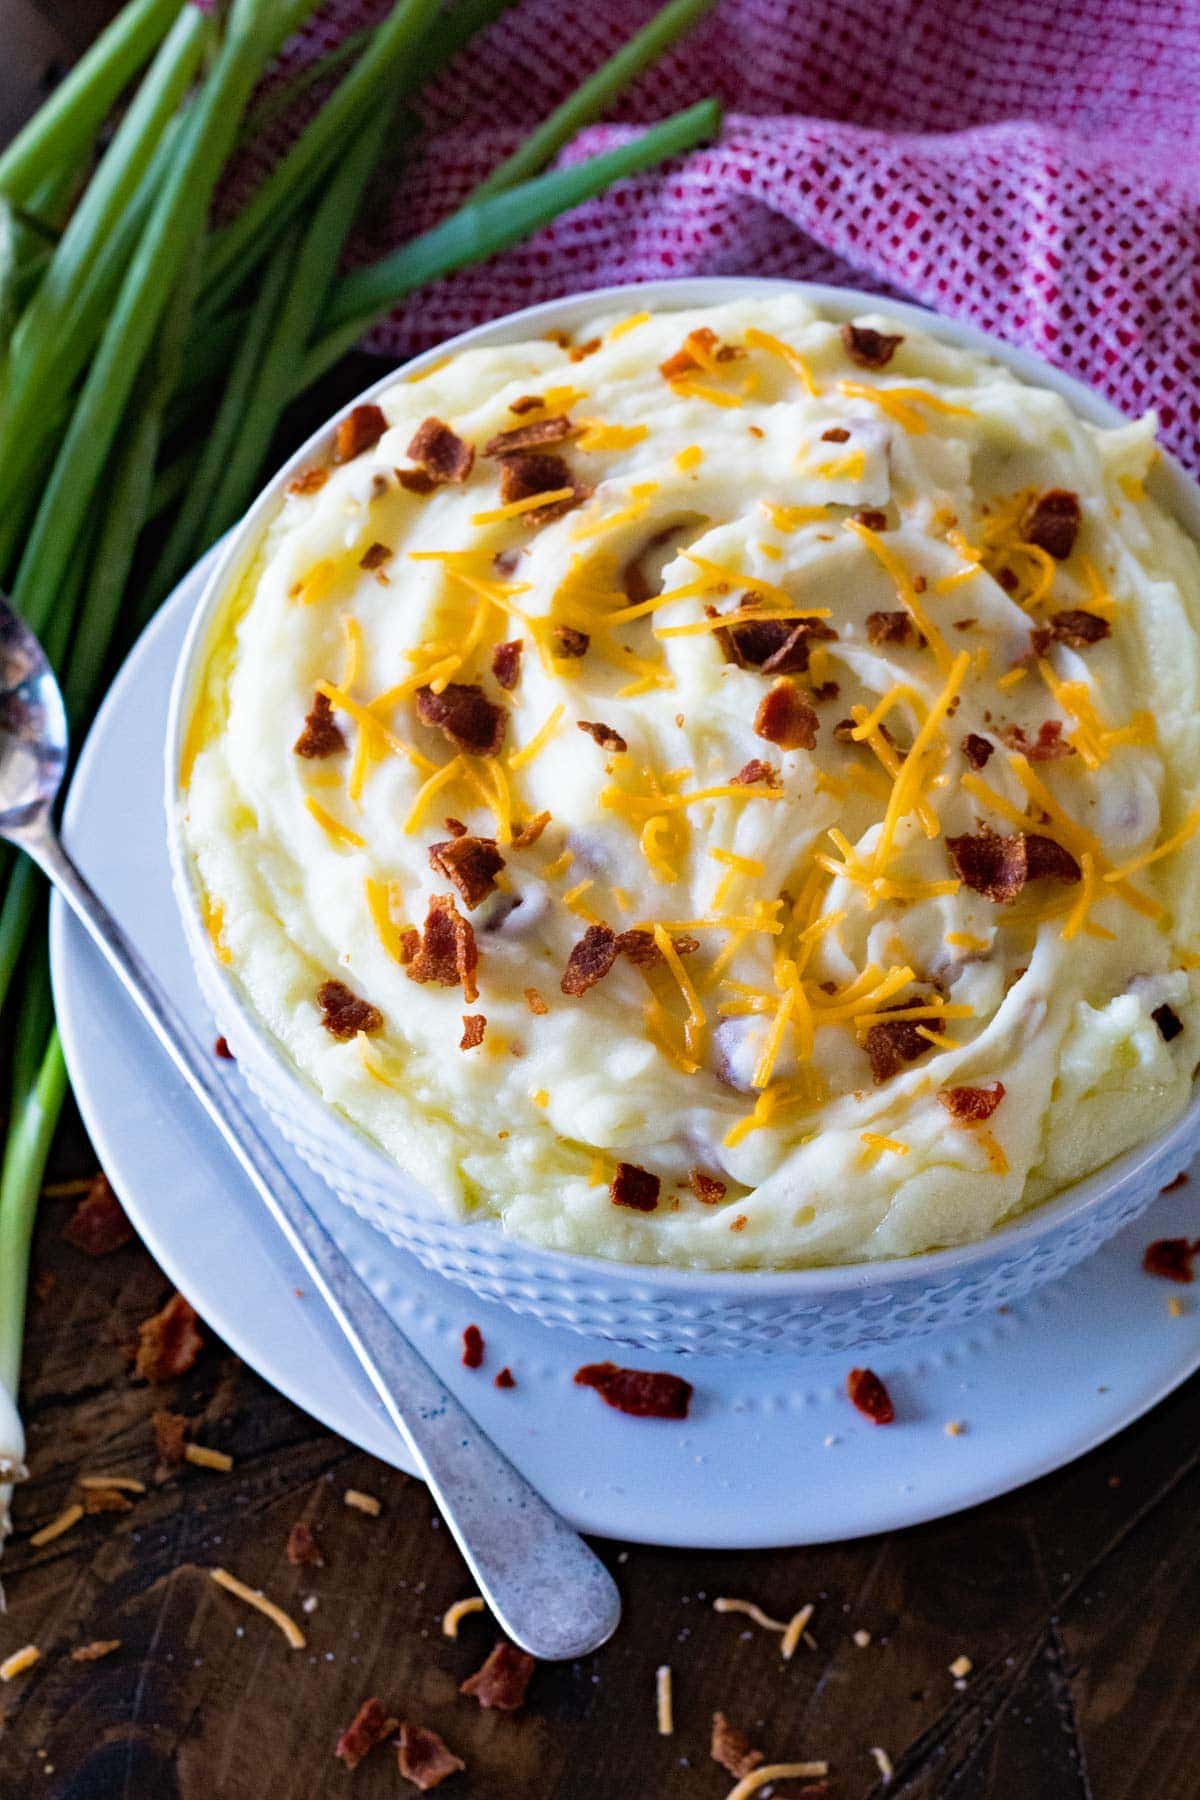 Easy Cheddar Bacon Mashed Potatoes made in your Pressure Cooker!